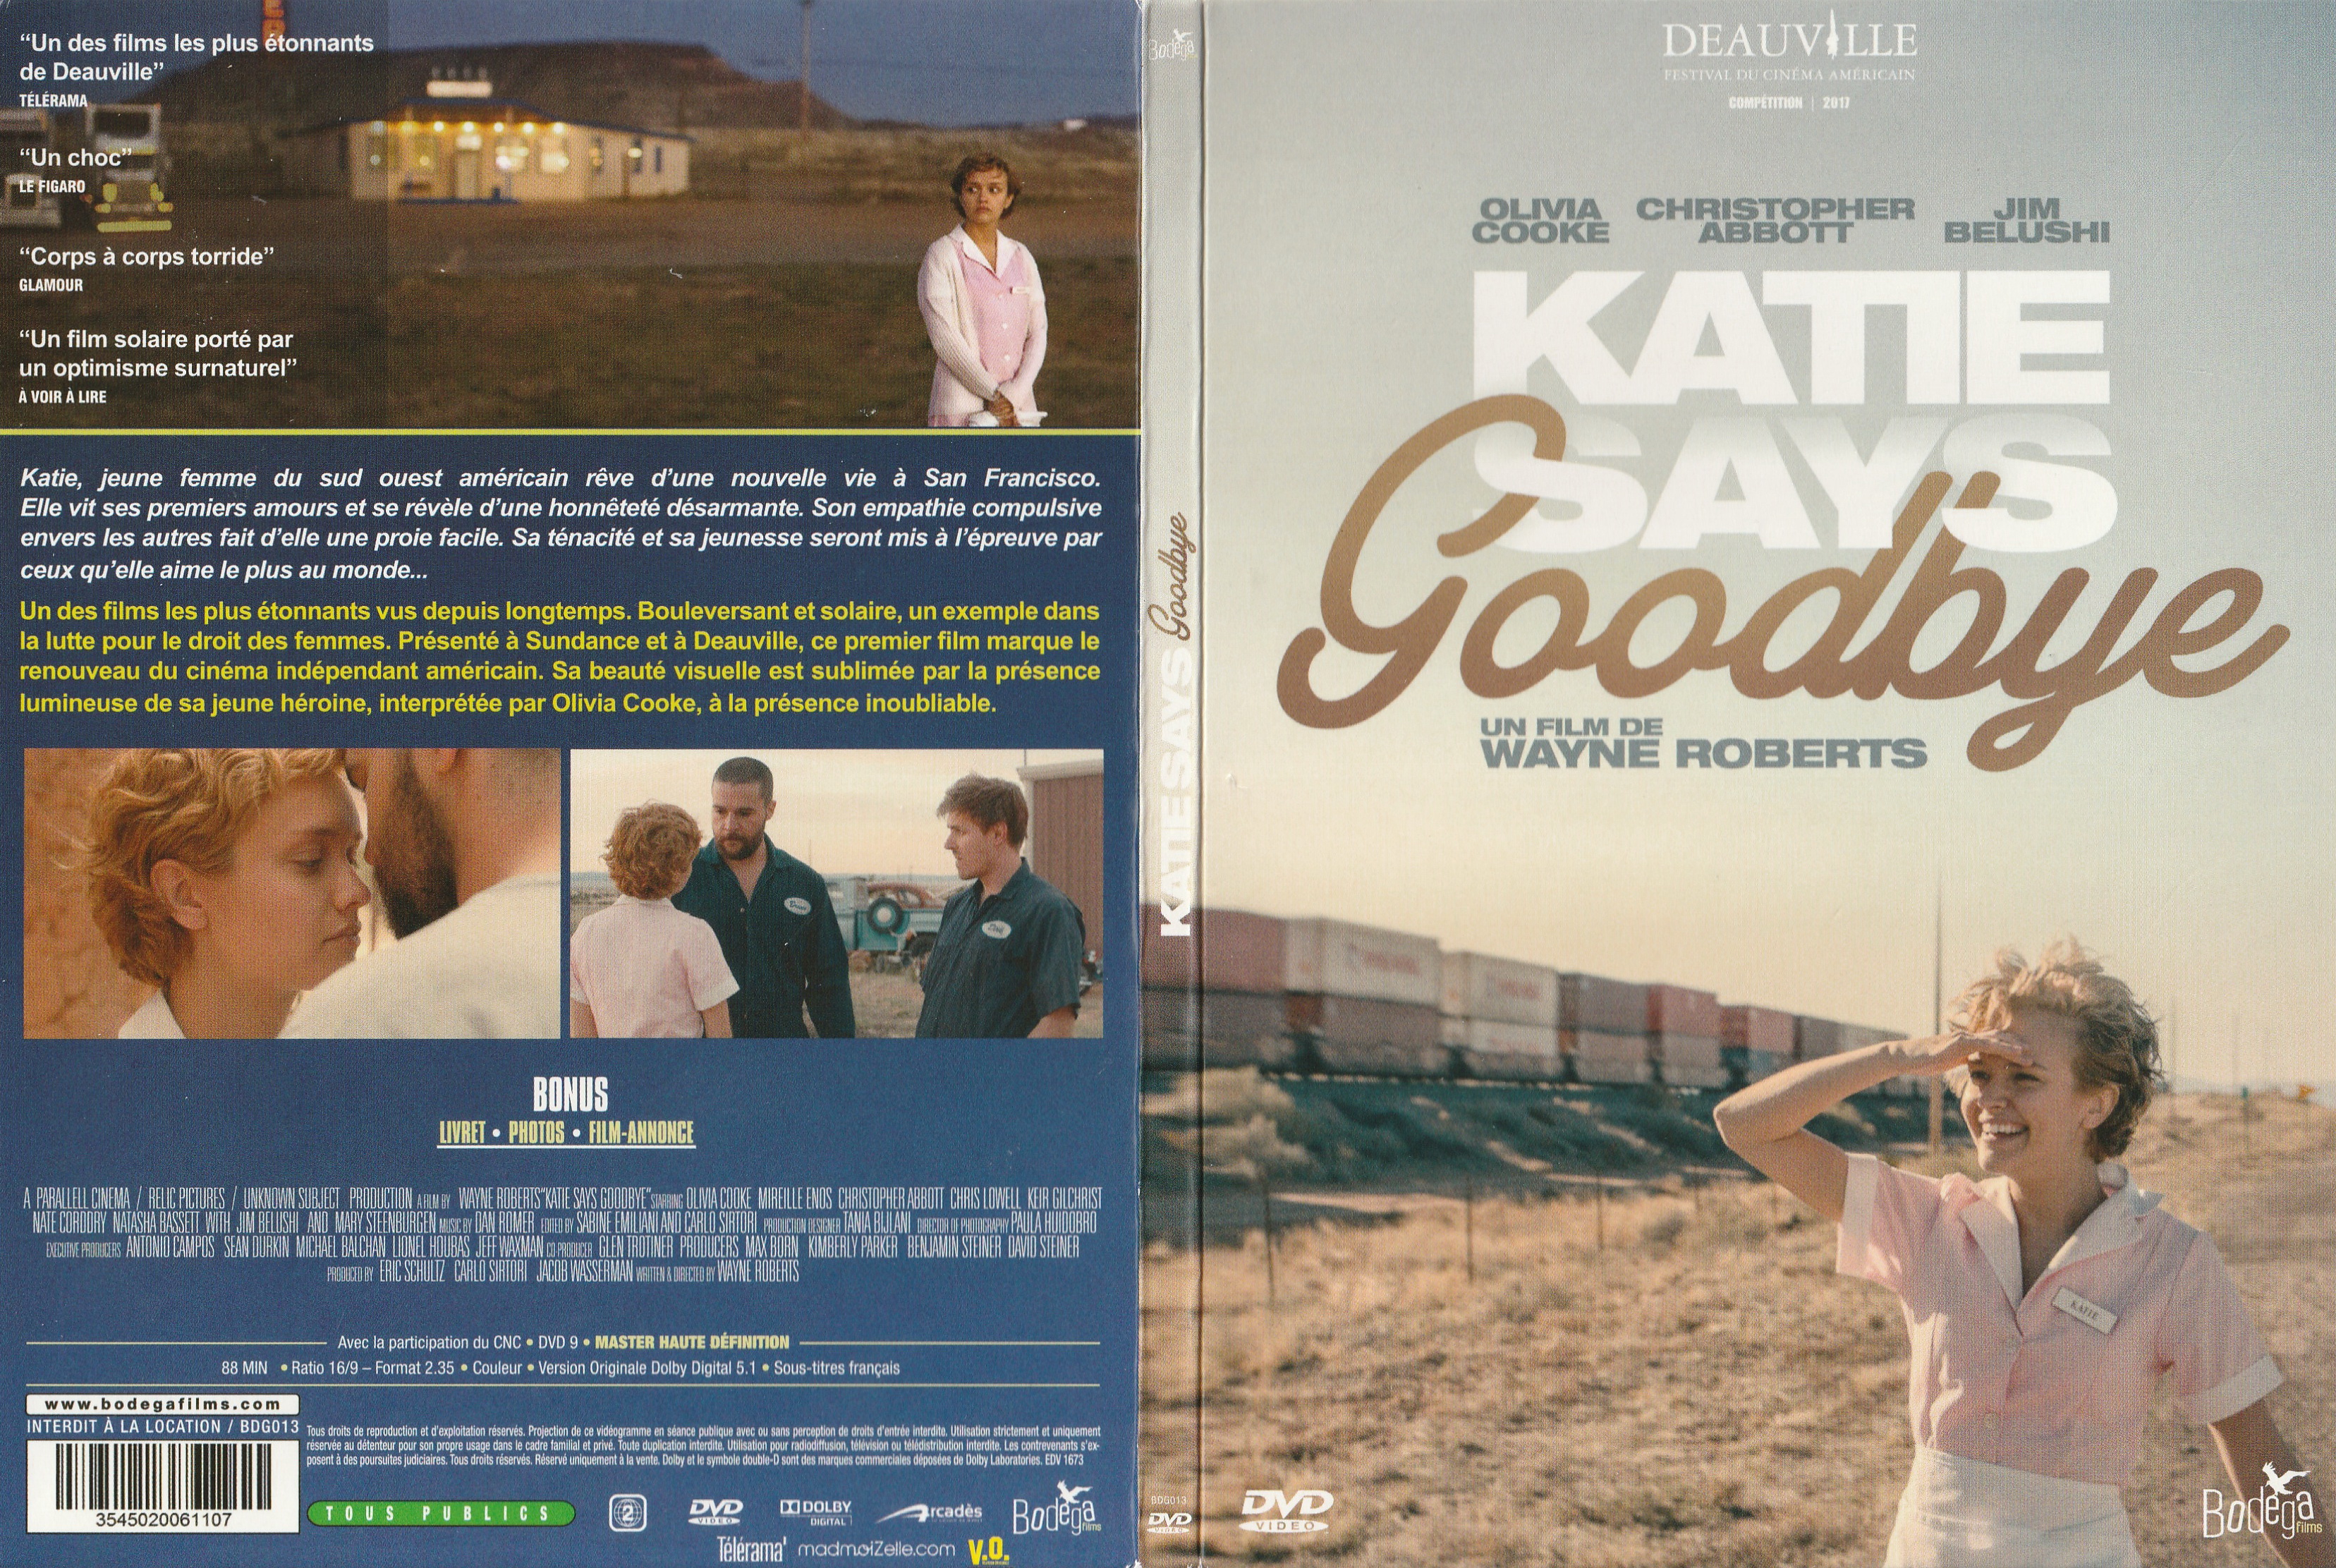 Jaquette DVD Katie says goodbye